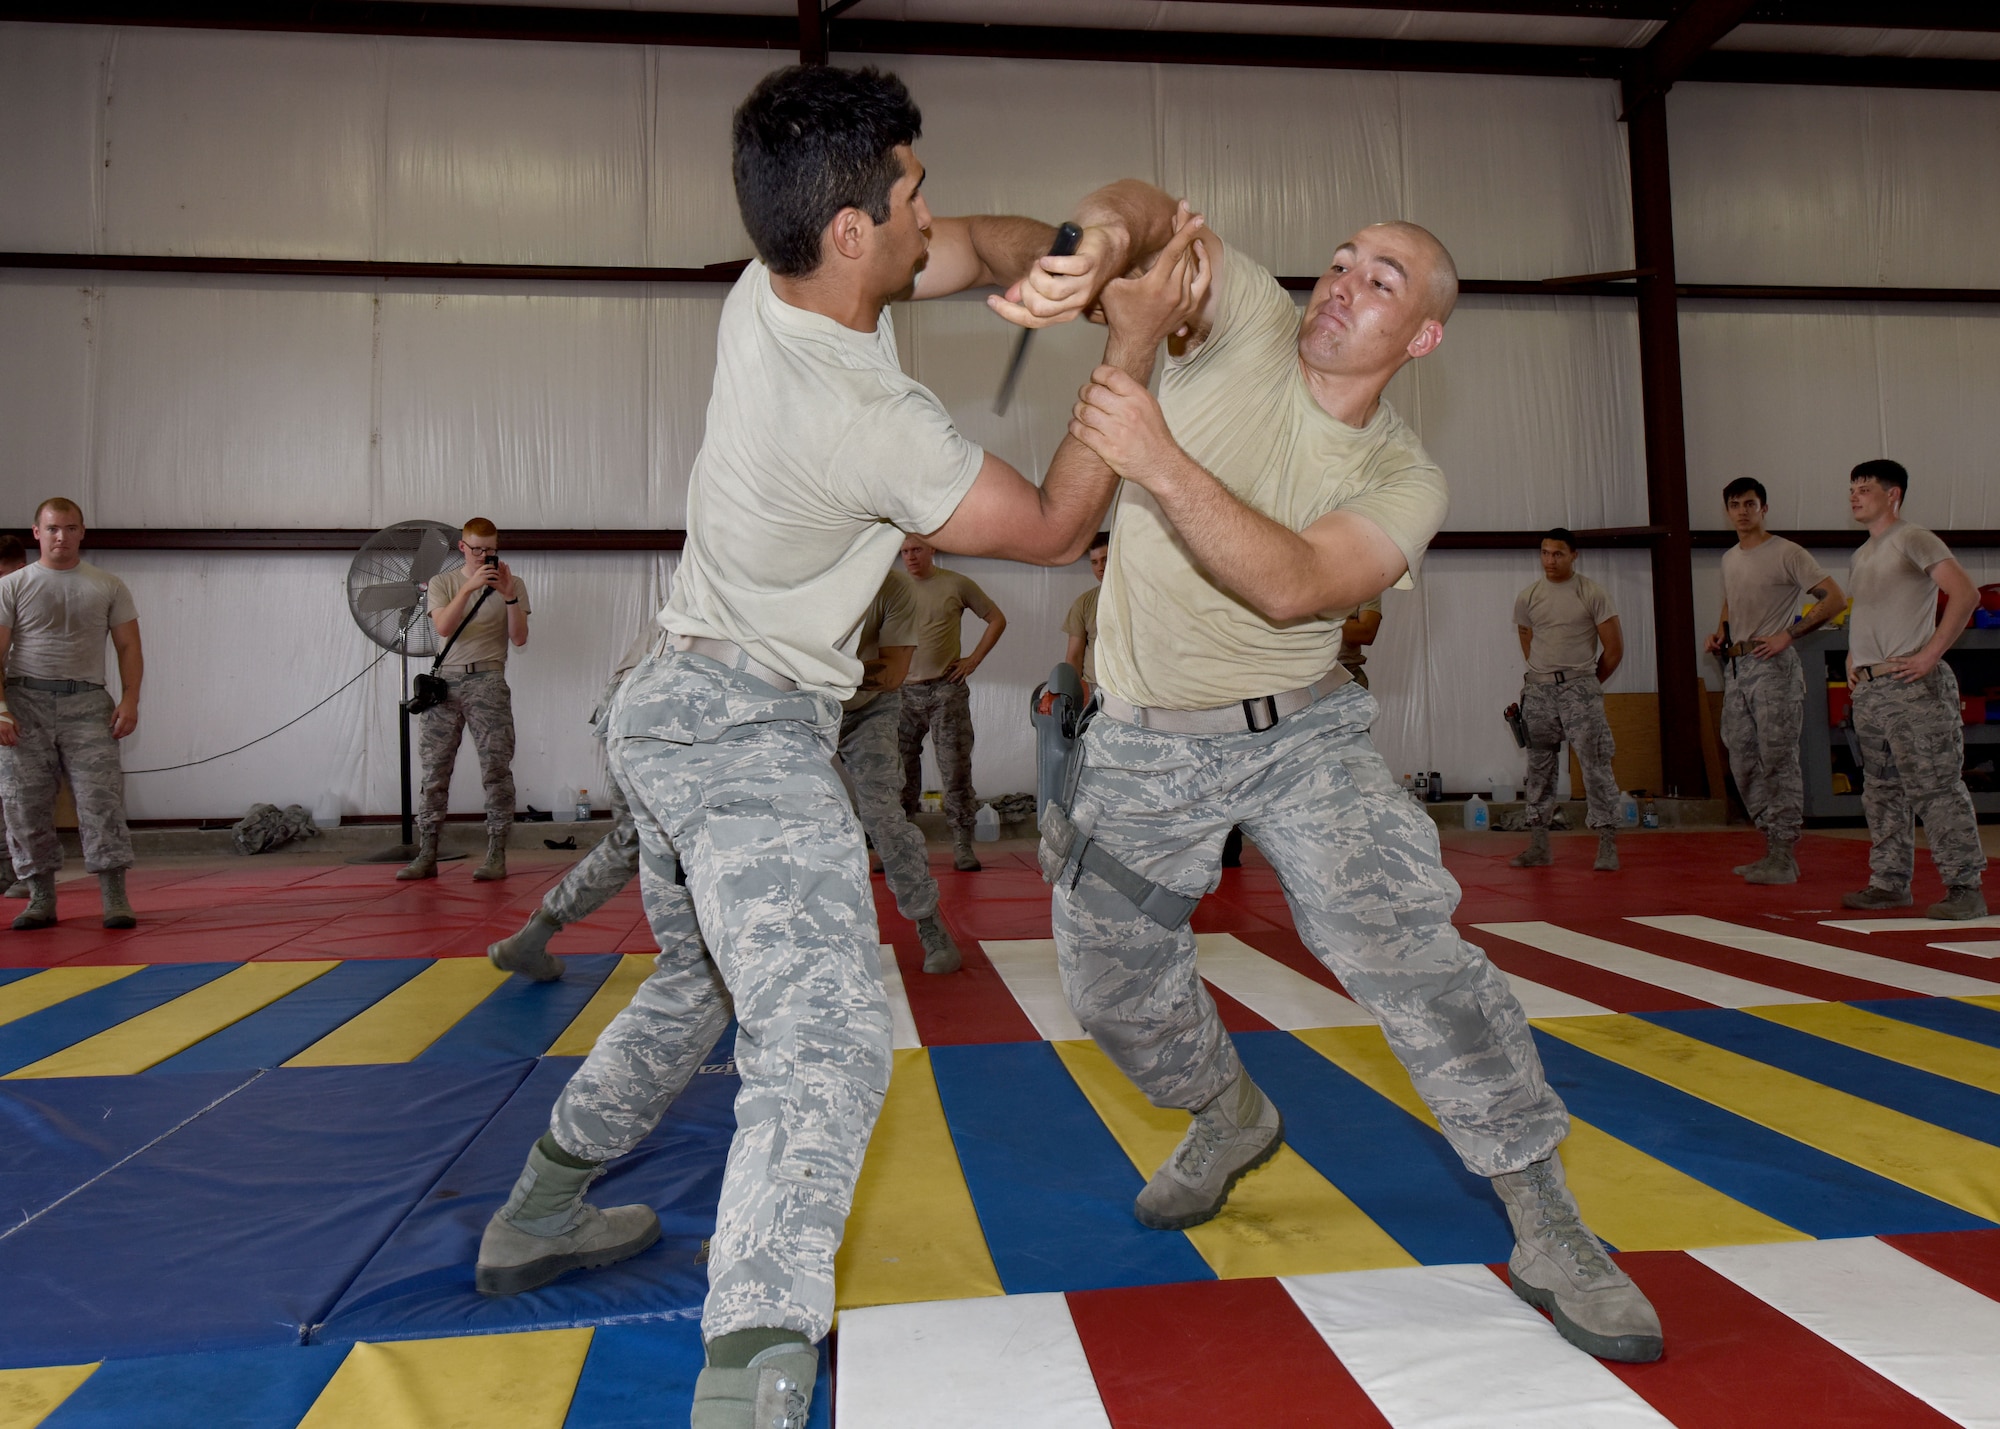 U.S. Air Force Airmen 1st Class Raumeen Hosseini and John Noble, 97th Security Forces Squadron response force members, practice defensive drills against a knife attack at Altus Air Force Base, Okla., Sept. 15, 2016. 97th SFS Airmen participated in a week-long training course that taught hand-to-hand defensive and subduing techniques, weapons handling and clearing and securing buildings, aircraft and buses as a team. (U.S. Air Force photo by Senior Airman Nathan Clark/Released)